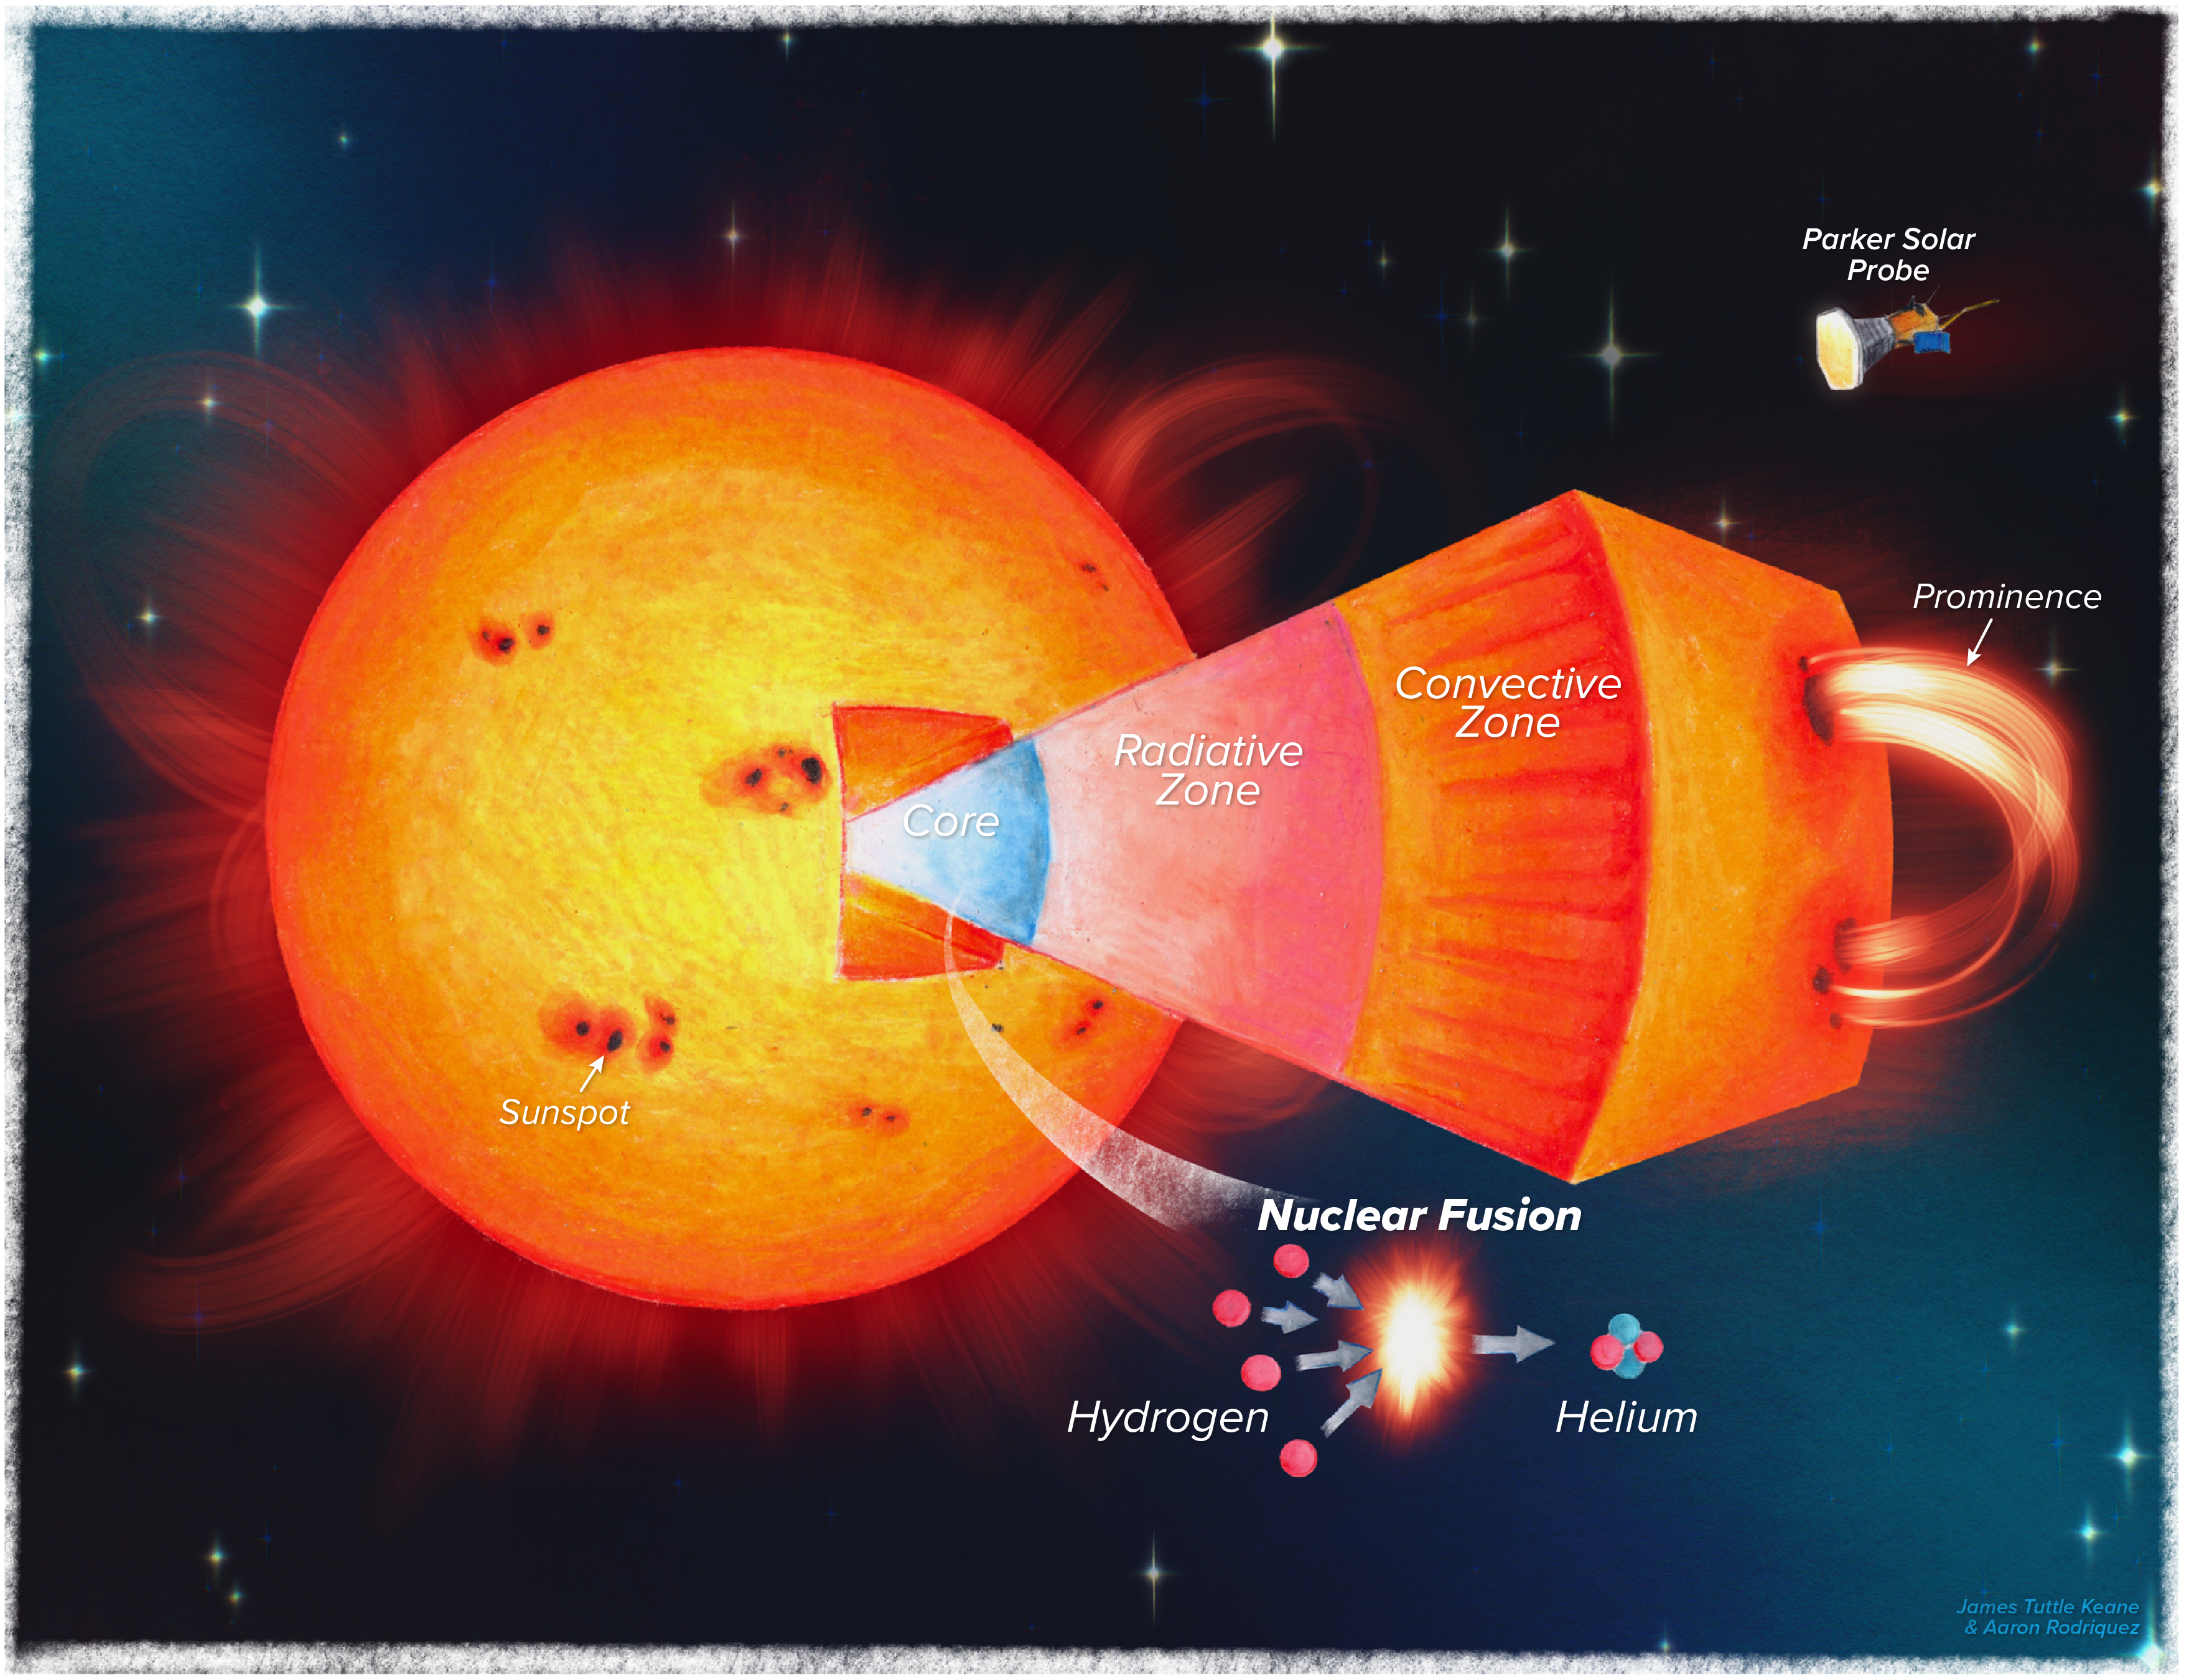 Illustration of the Sun with sunspots. A blown out portion shows the Sun's Core, Radiative Zone and Convection Zone (in order going outward). A cartoon of Hydrogen fusing into Helium is shown at bottom and the Parker Solar Probe at top.